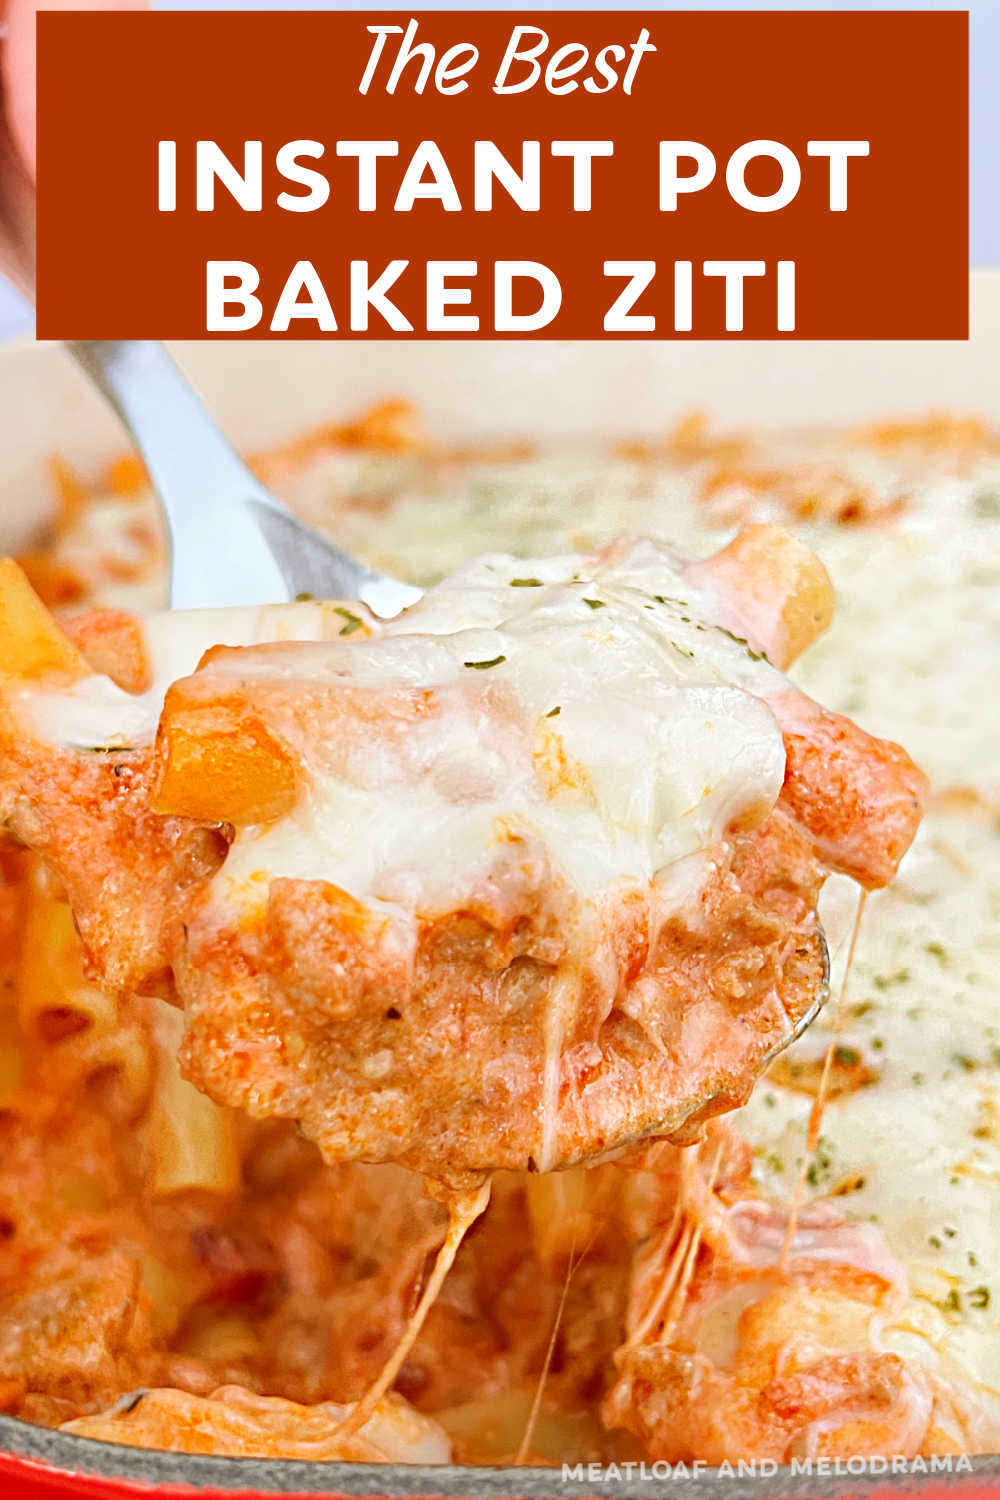 Instant Pot Baked Ziti with sausage, ricotta cheese mozzarella cheese and marinara sauce is an easy Instant Pot pasta recipe the whole family will love. Cook ziti in the pressure cooker, then bake it in the oven for a delicious cheesy pasta bake! via @meamel